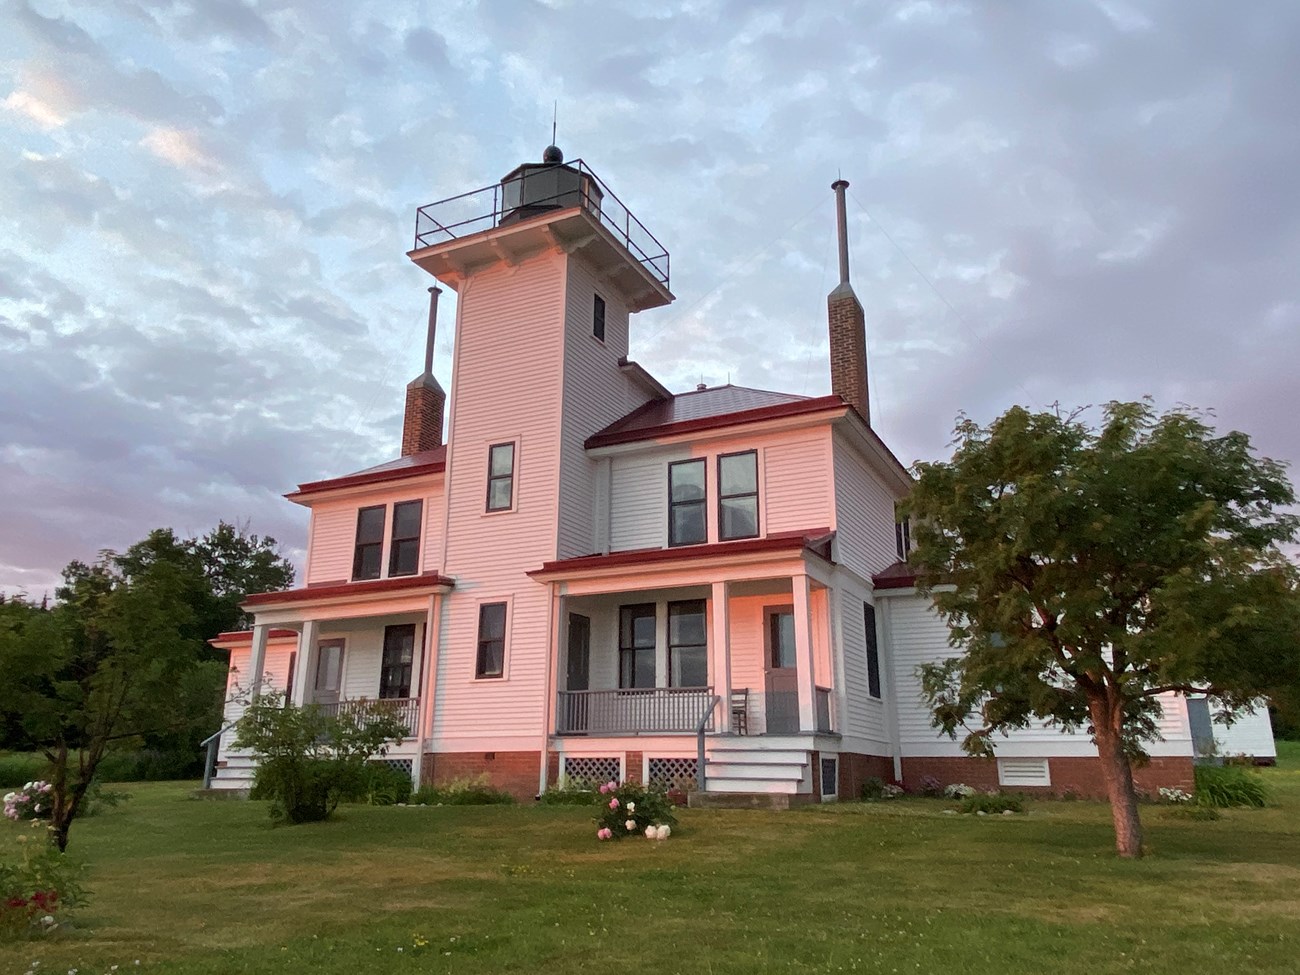 A white lighthouse station with red trim and green lawn glows pink at sunset.